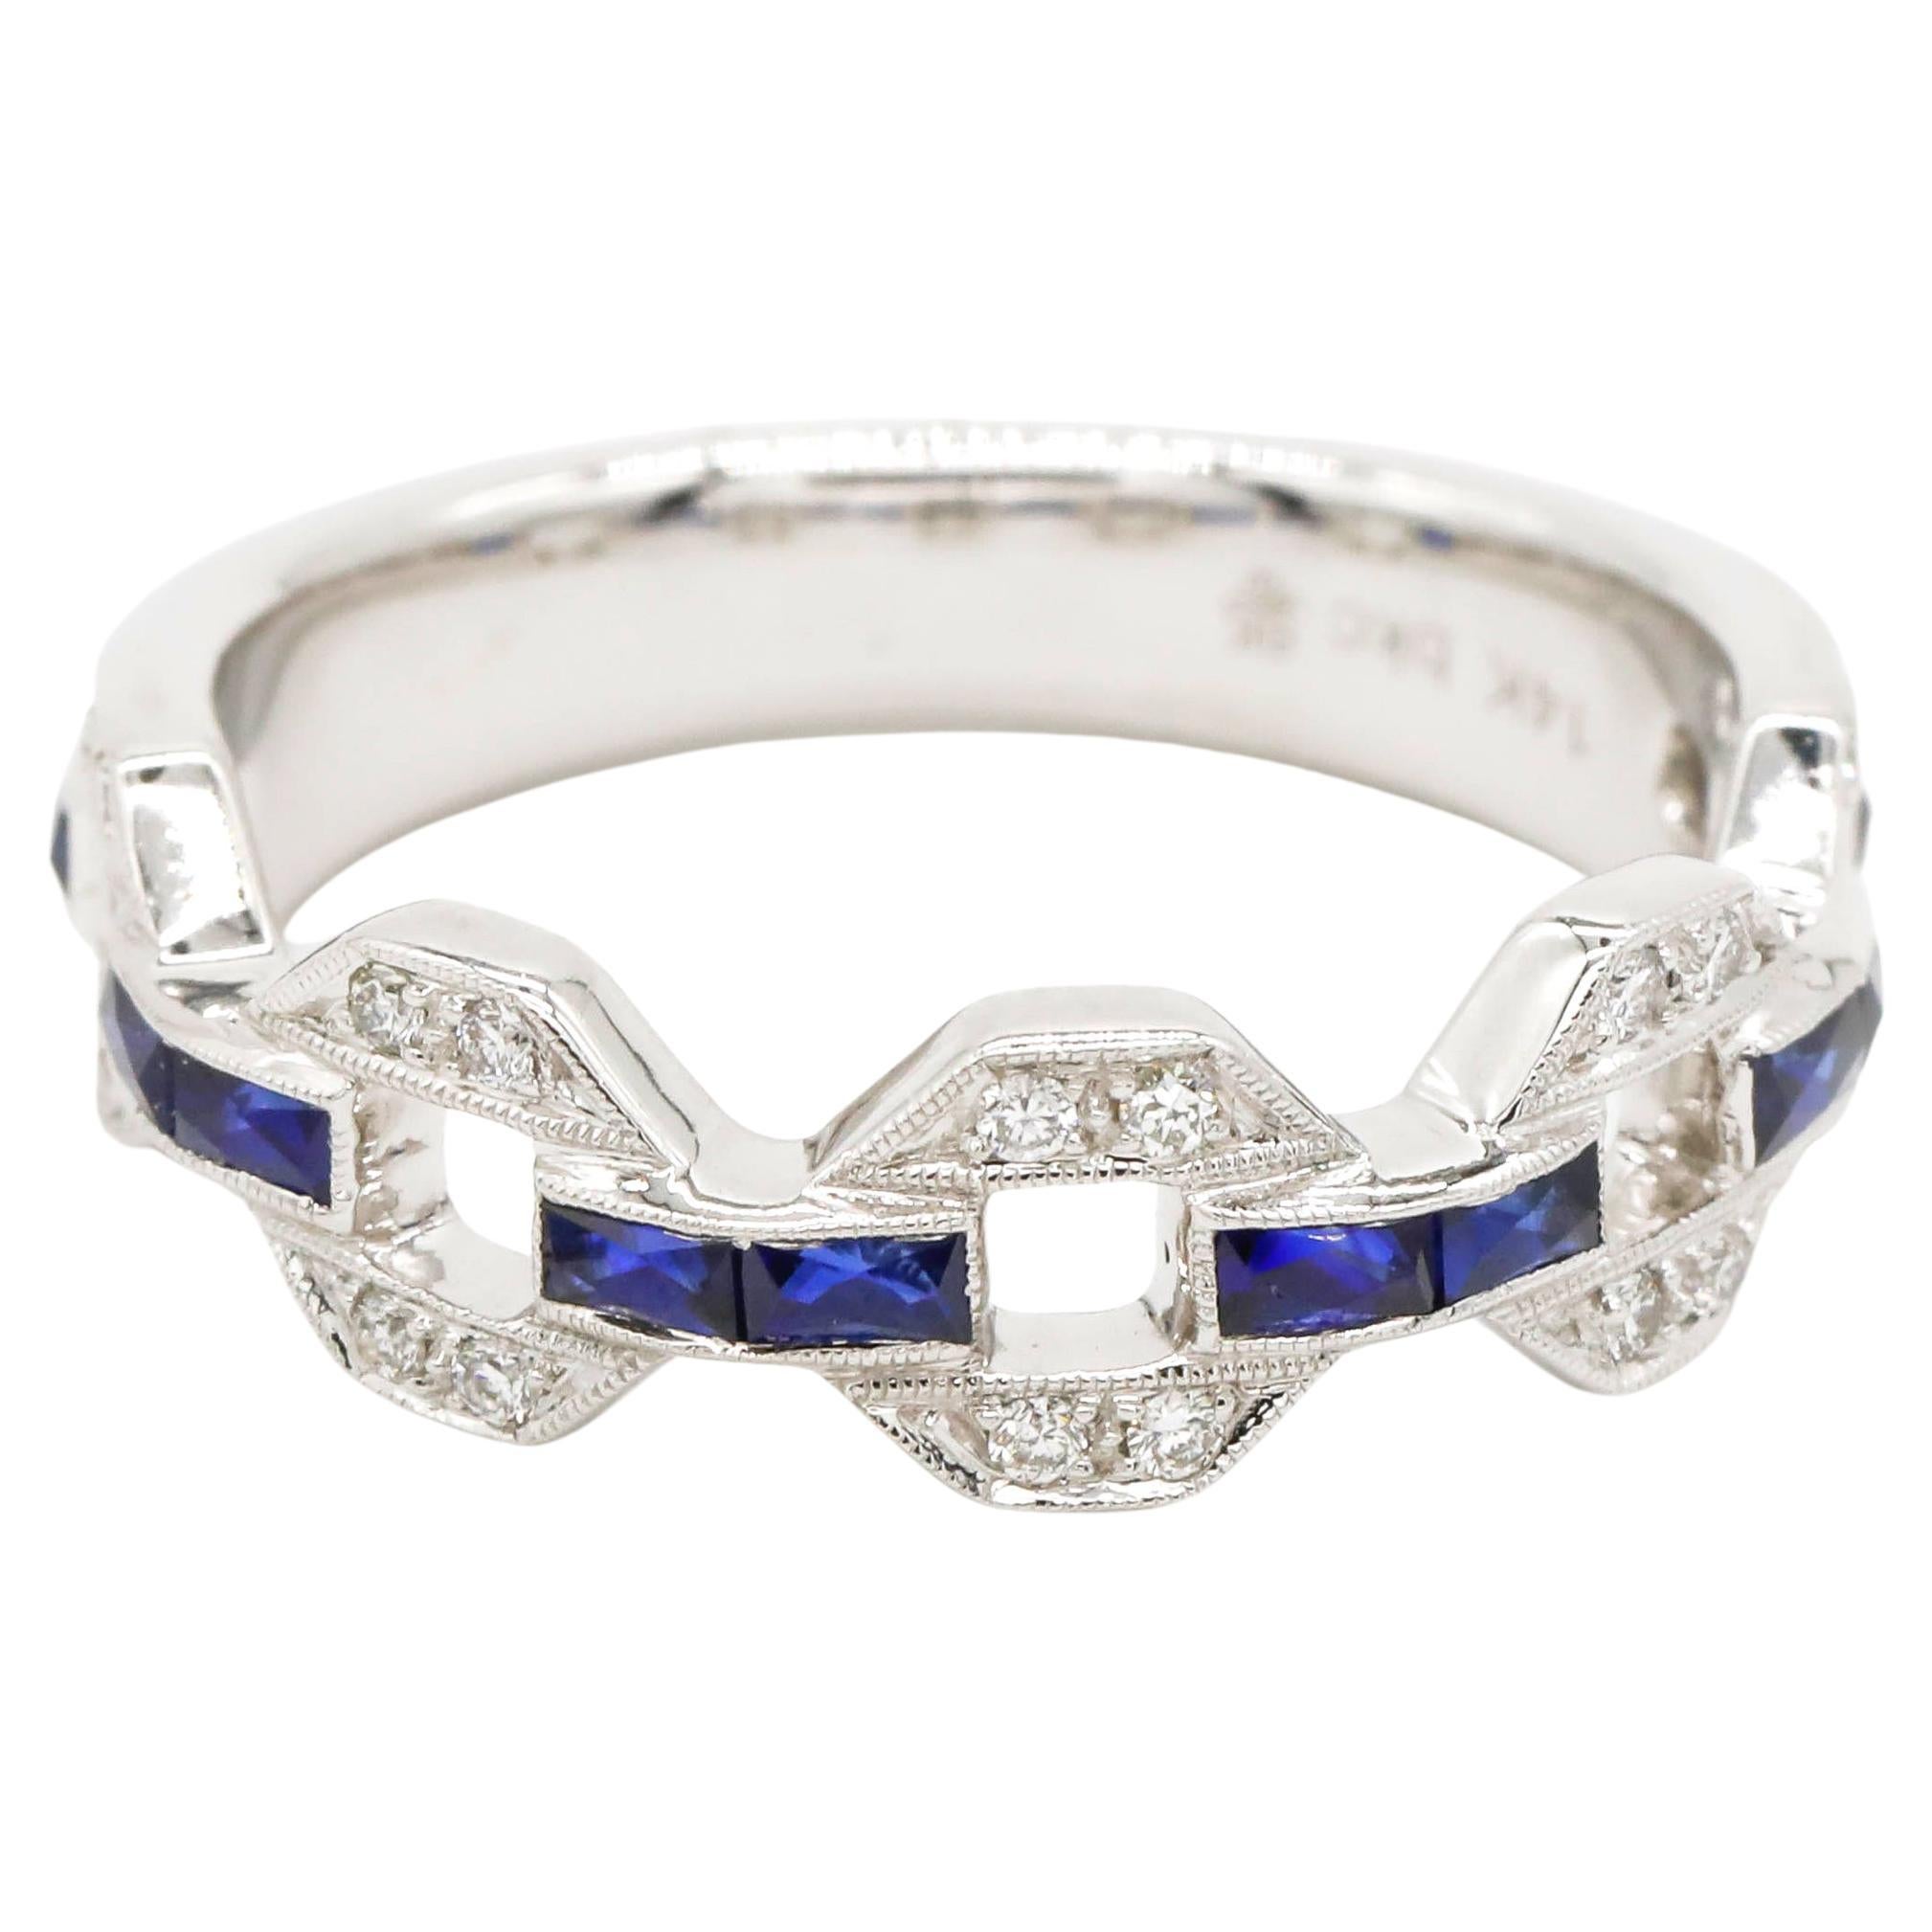 18k White Gold Link Design 0.12 Ct Round Cut Diamond Pave Sapphire Band Ring